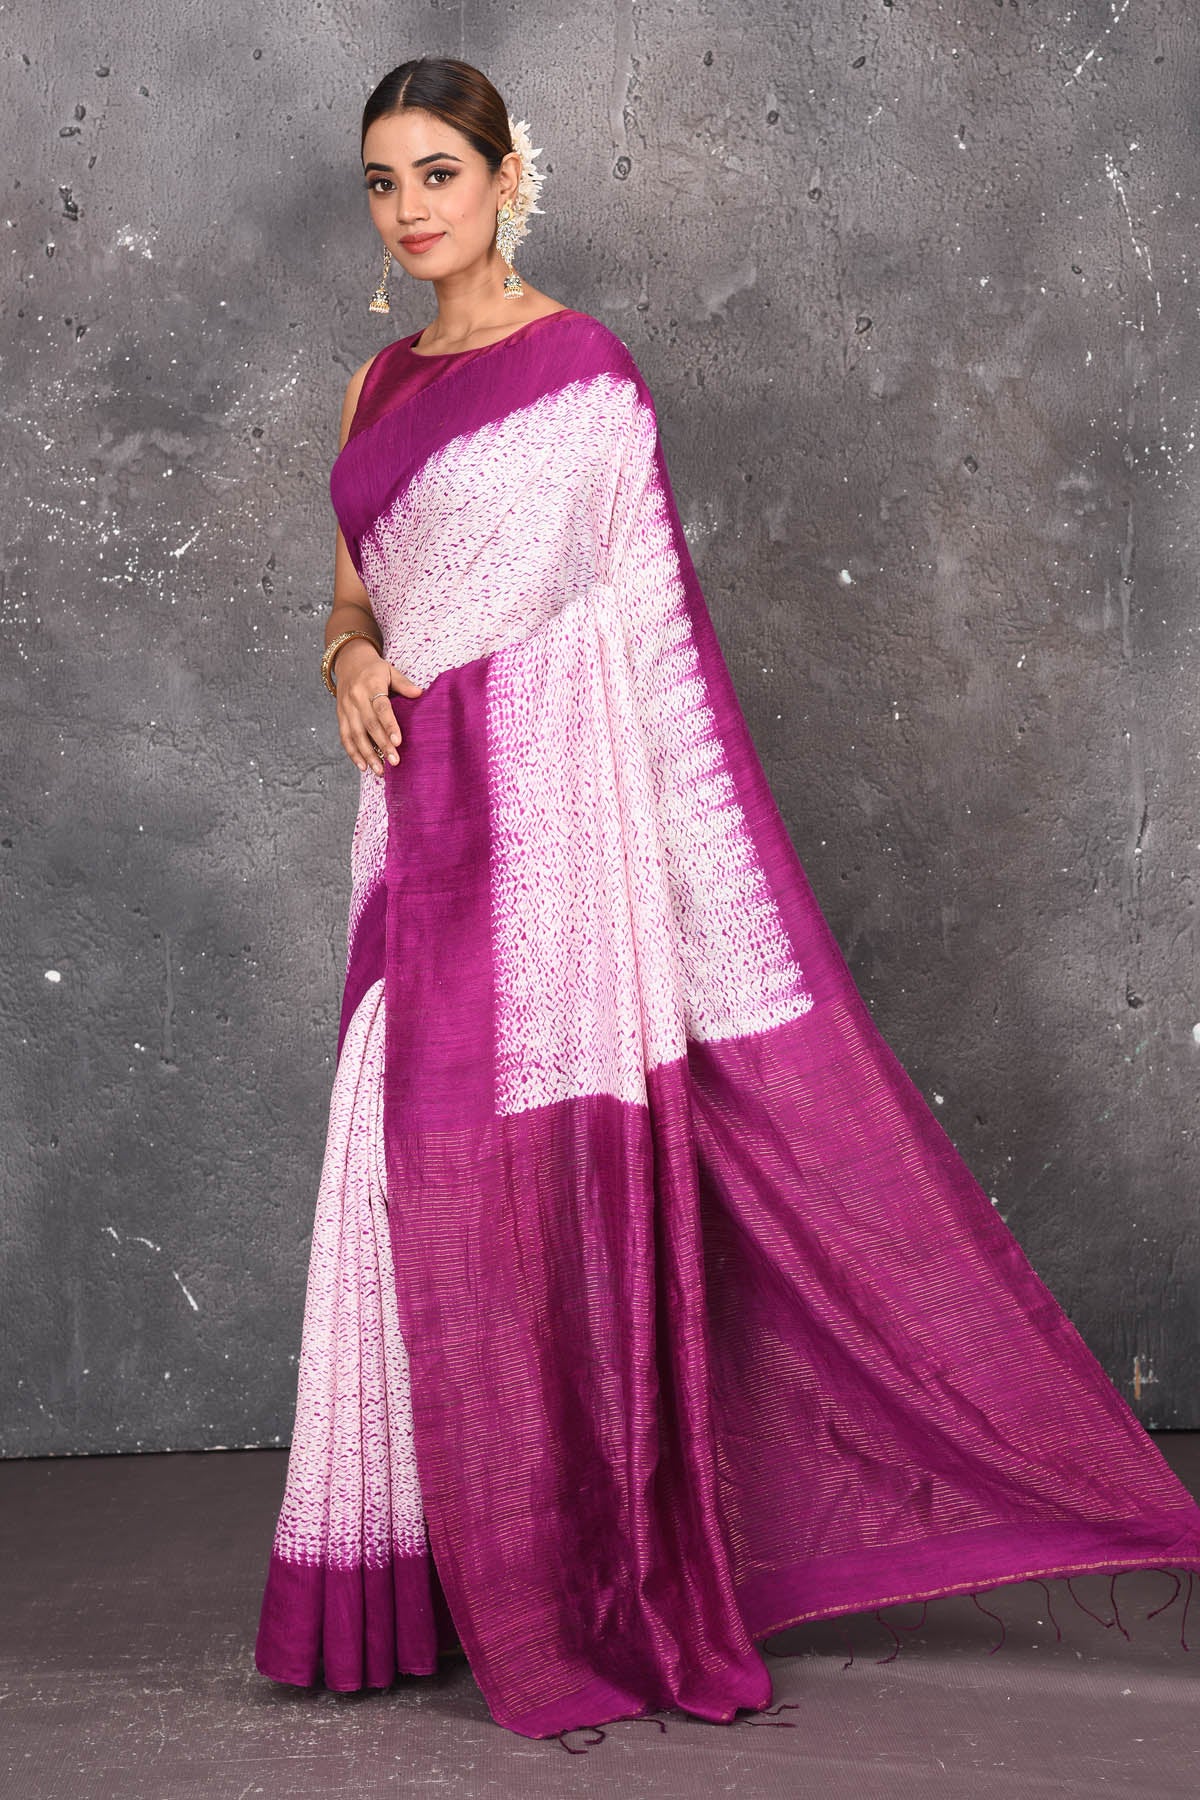 Shop this elegant offwhite-purple handloom shibori tussar saree online in USA which is handcrafted from fine silk tussar fabric, this tie and dye saree brings out the nature of flow. You can pair this beautiful shibori print with minimal jewellery for a casual day outfit. Add this plain shibori saree to your collection from Pure Elegance Indian fashion store in USA.- Side view with open pallu.